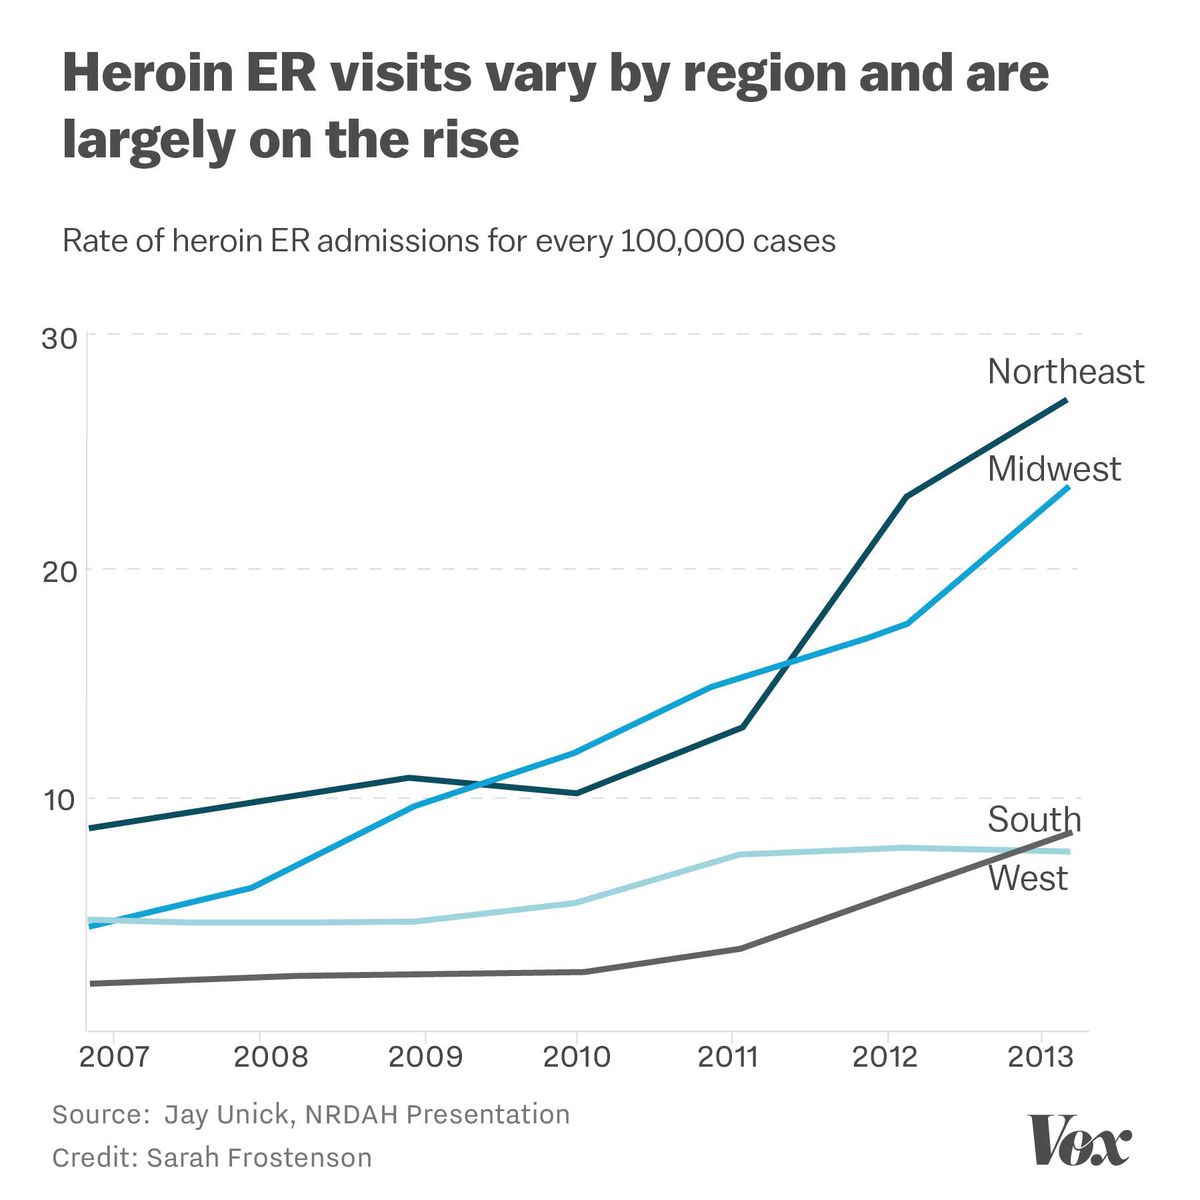 Chart showing that Heroin ER visits vary by region and are mostly on the rise.